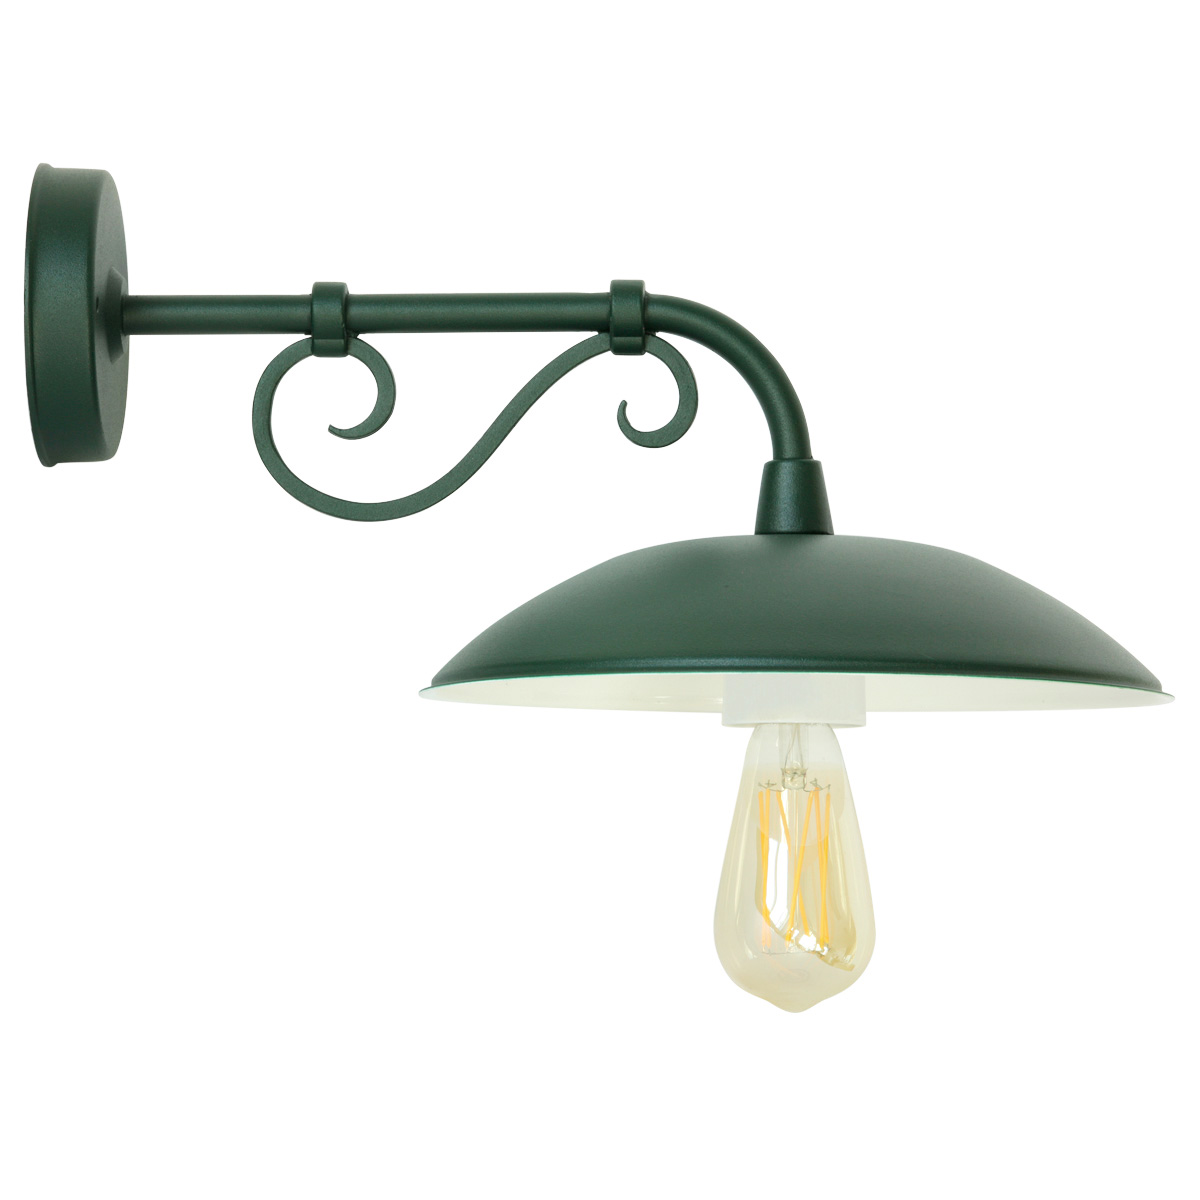 Outdoor Italian Wall Light with Decorative S-Arm